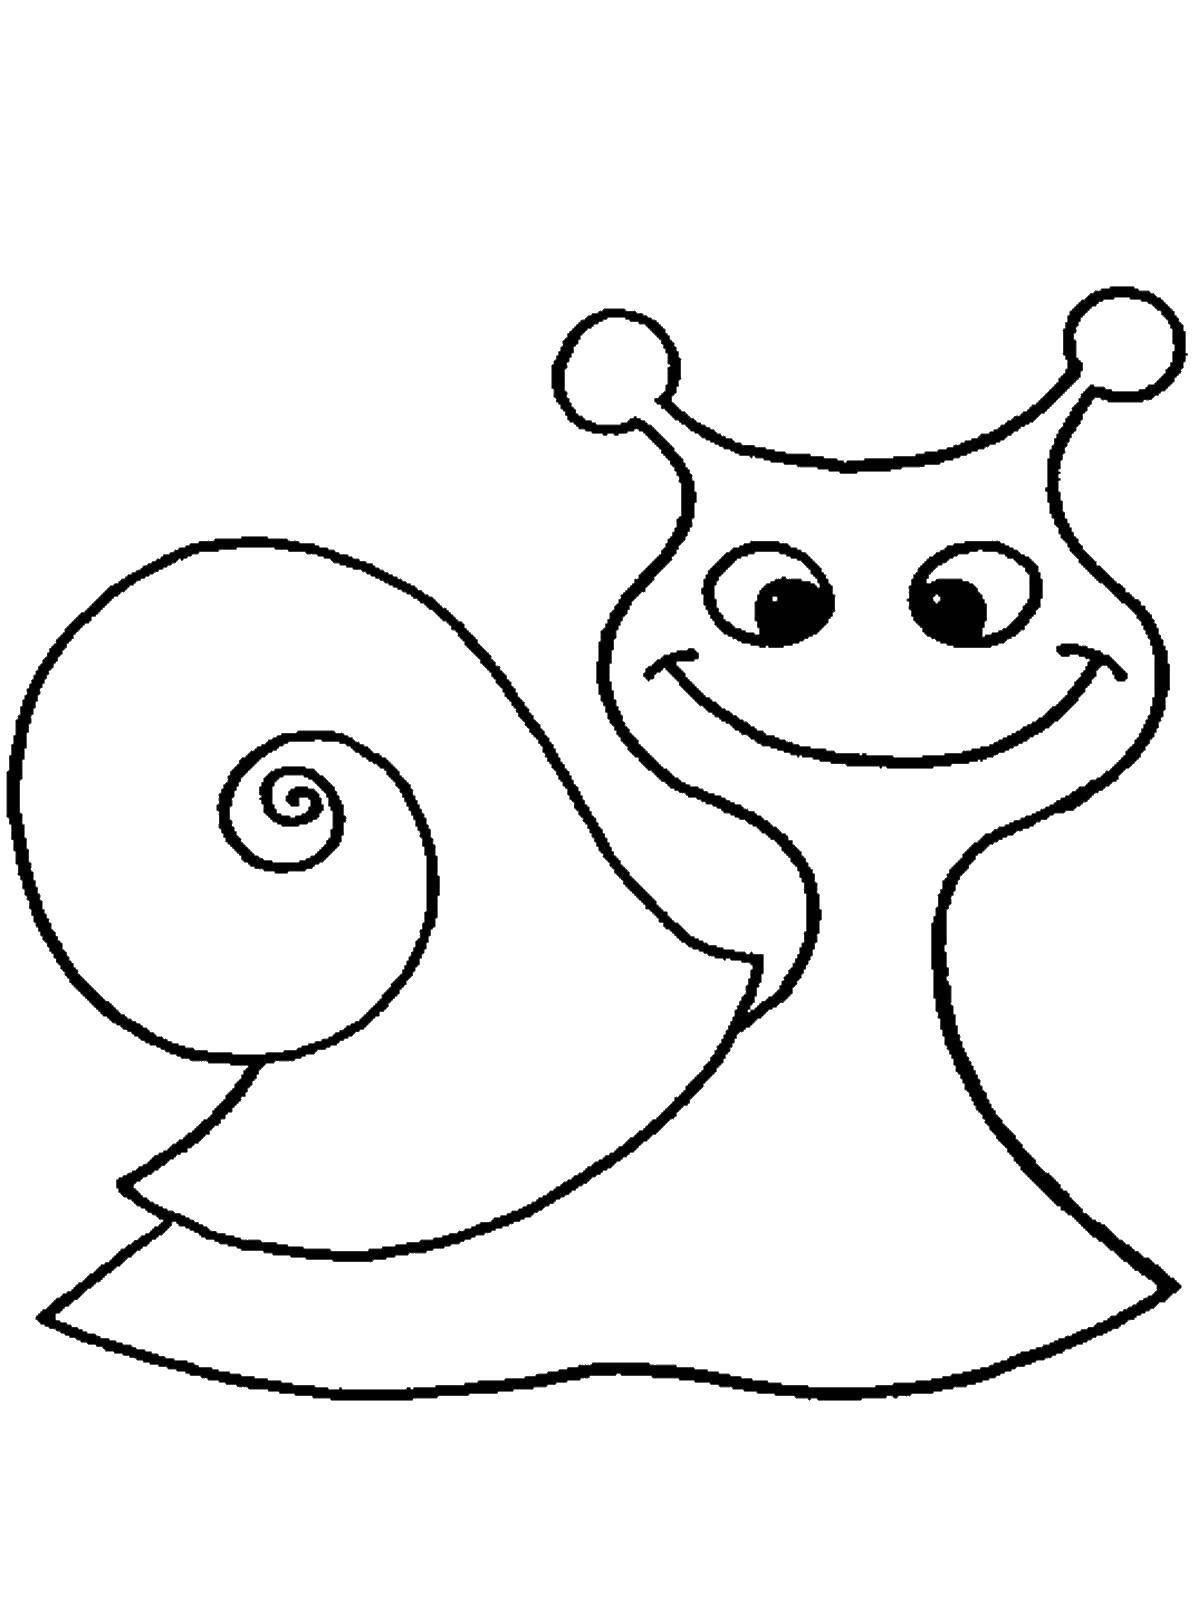 Coloring Snail. Category little ones. Tags:  snail.